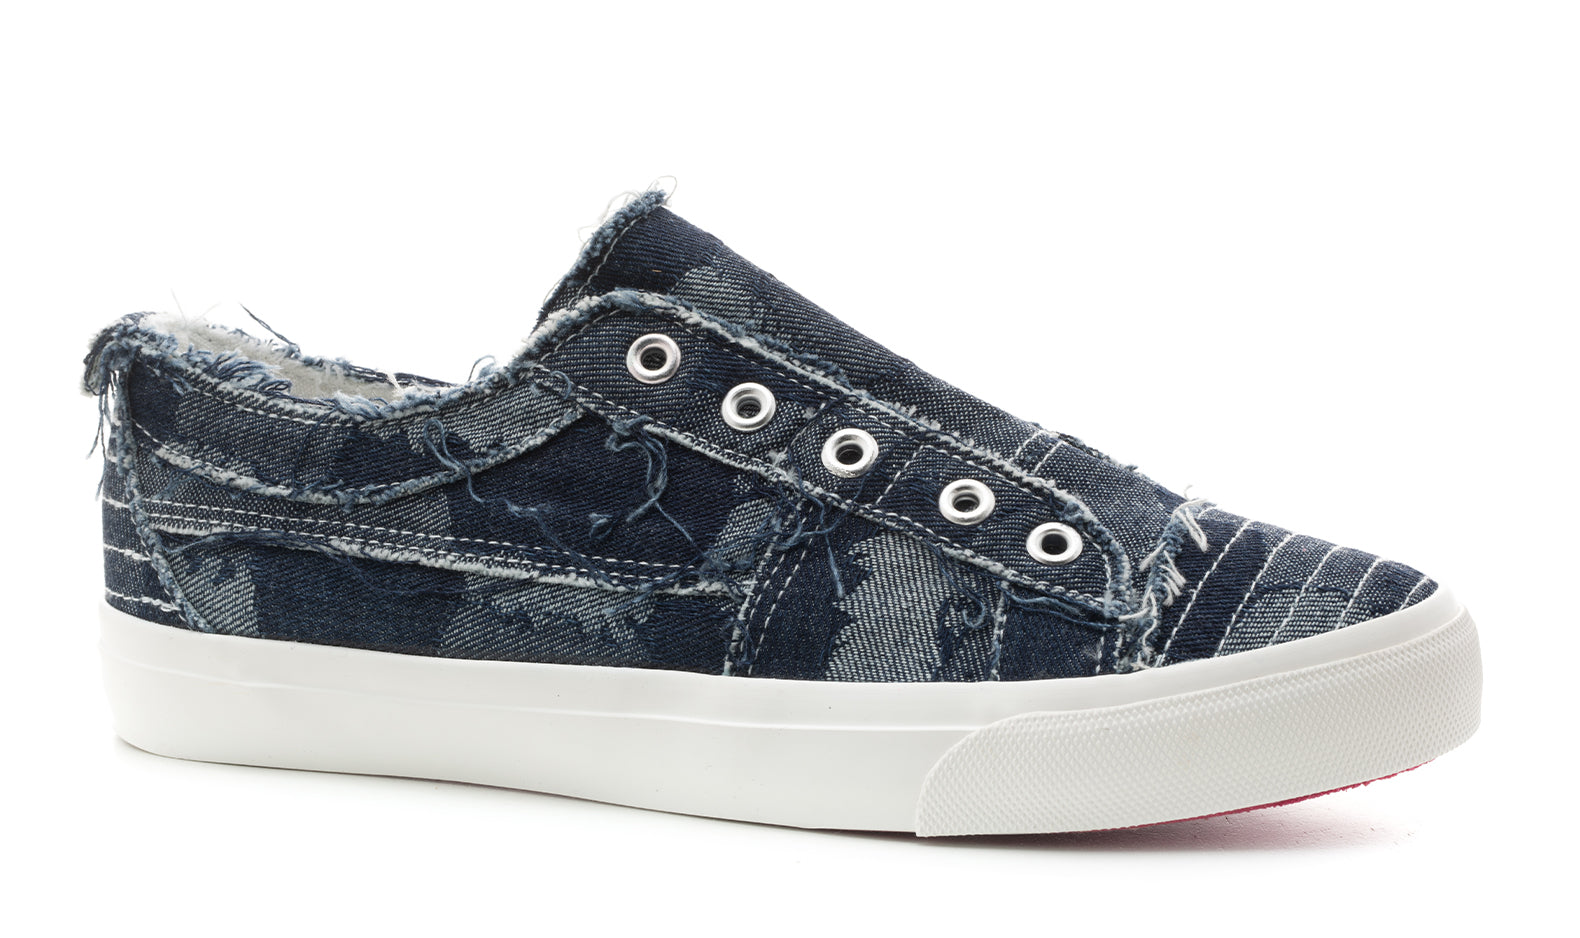 Corkys Shoes - Babalu Dark Denim Patches Sneaker  SALE 40% OFF  NOW $22.95